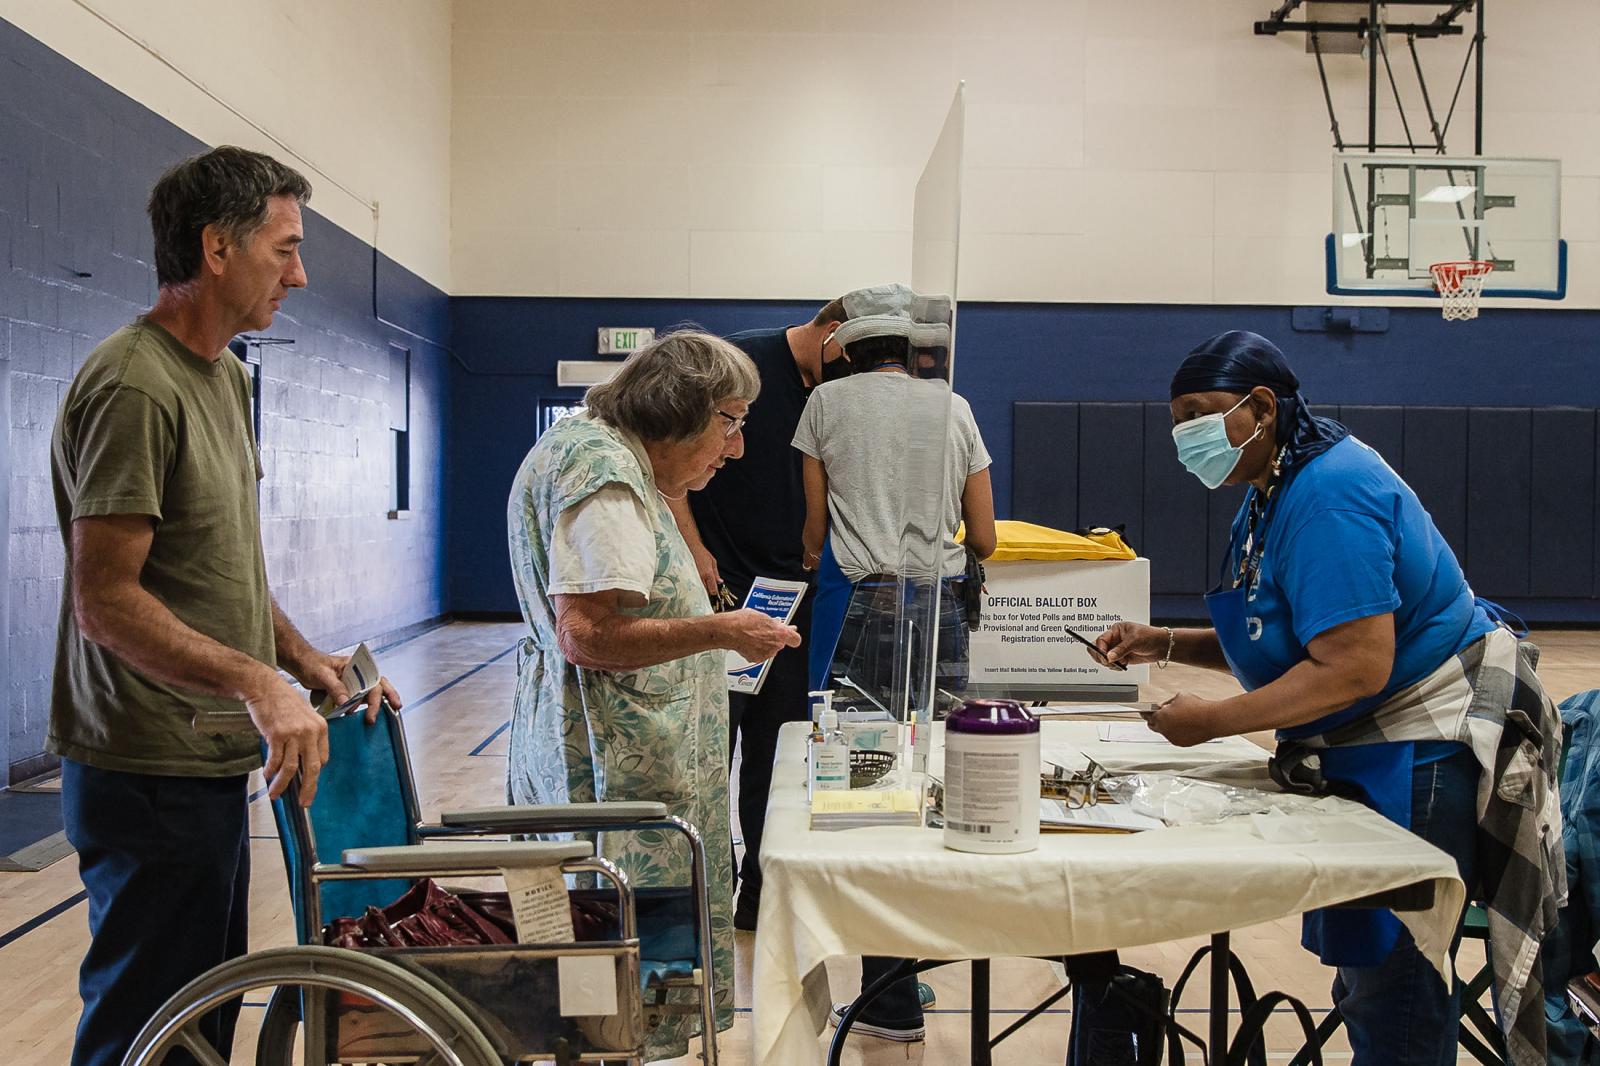 Voters at a polling station for the California gubernatorial recall election at the Golden Hill Recreation Center in San Diego, California on September 14, 2021.